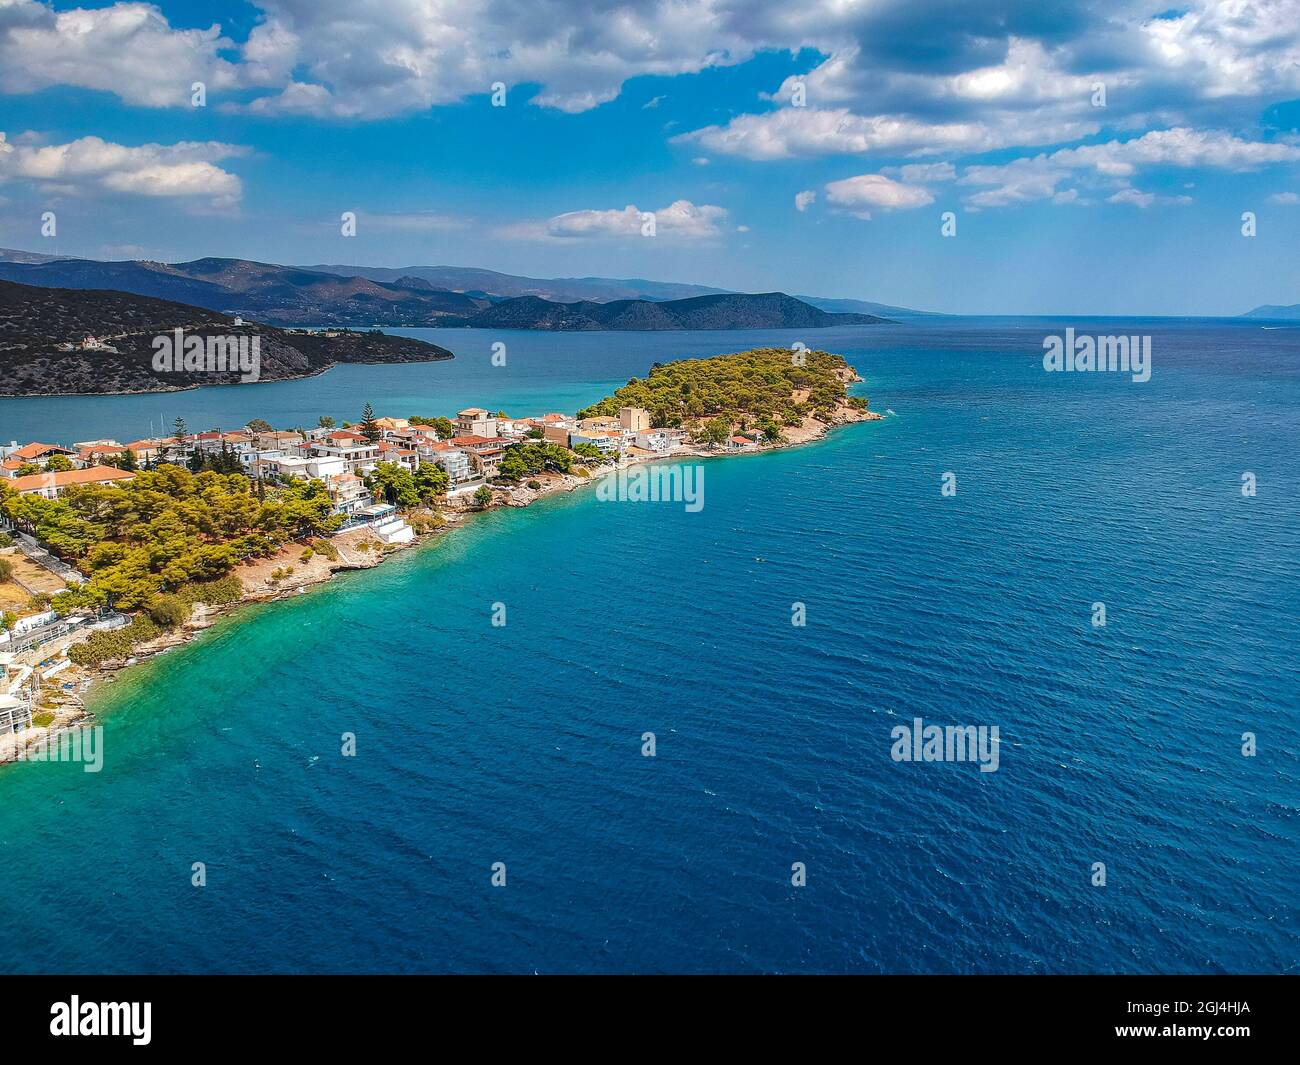 Aerial panoramic photo of picturesque seaside town of Ermioni built in peninsula with forest of Bistis at the end, Argolida, Peloponnese, Greece Stock Photo